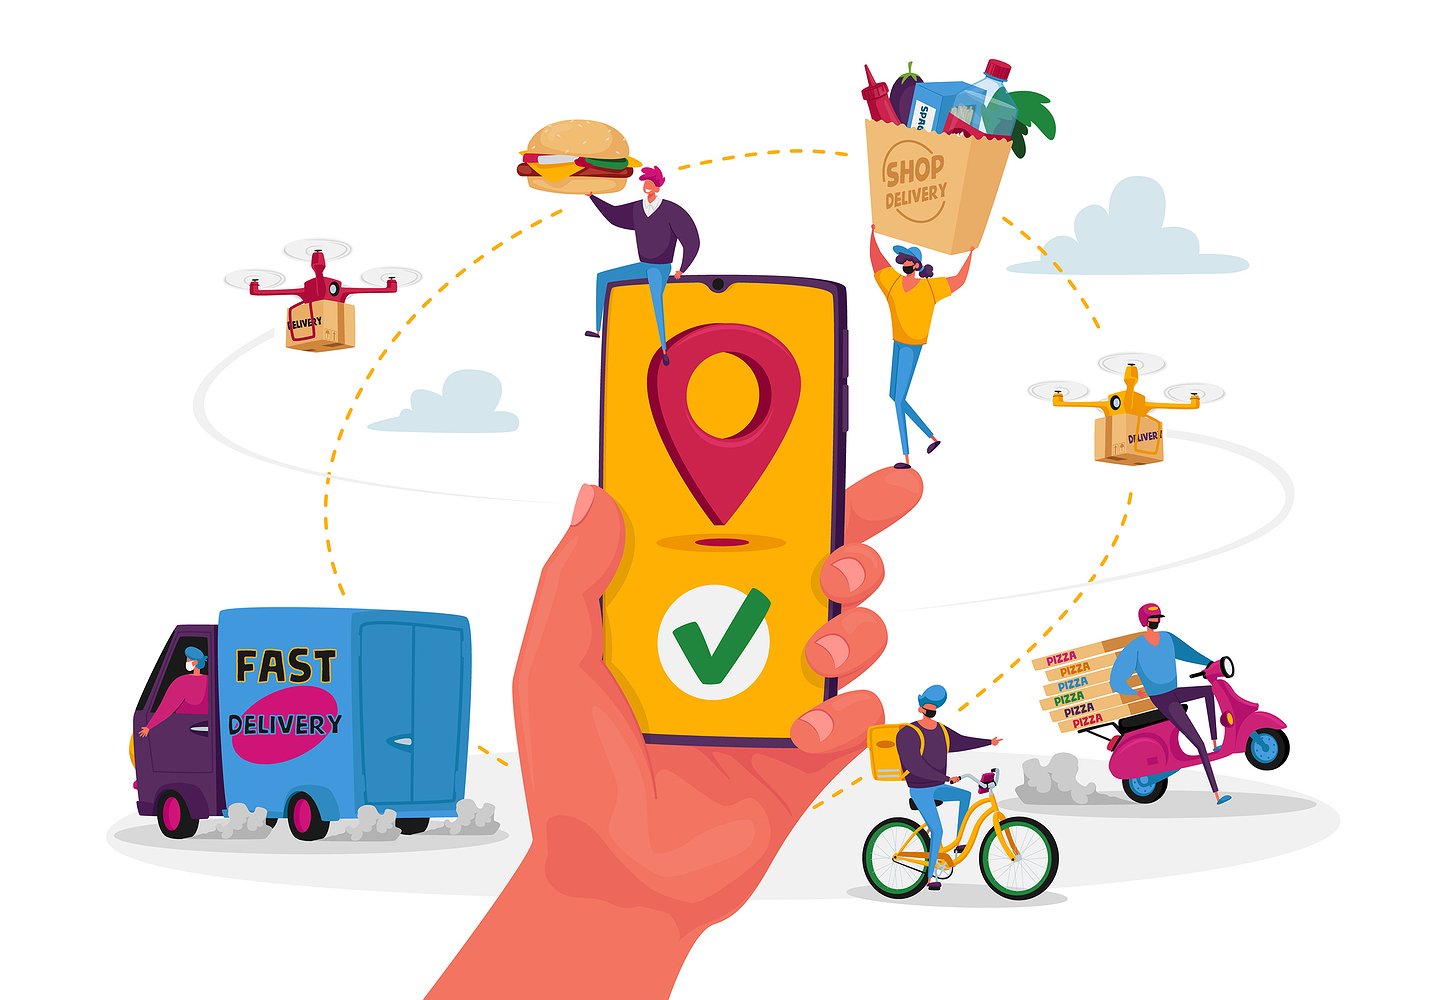 NY Interconnect: Dishing Up Choice Audiences for Food Delivery Services